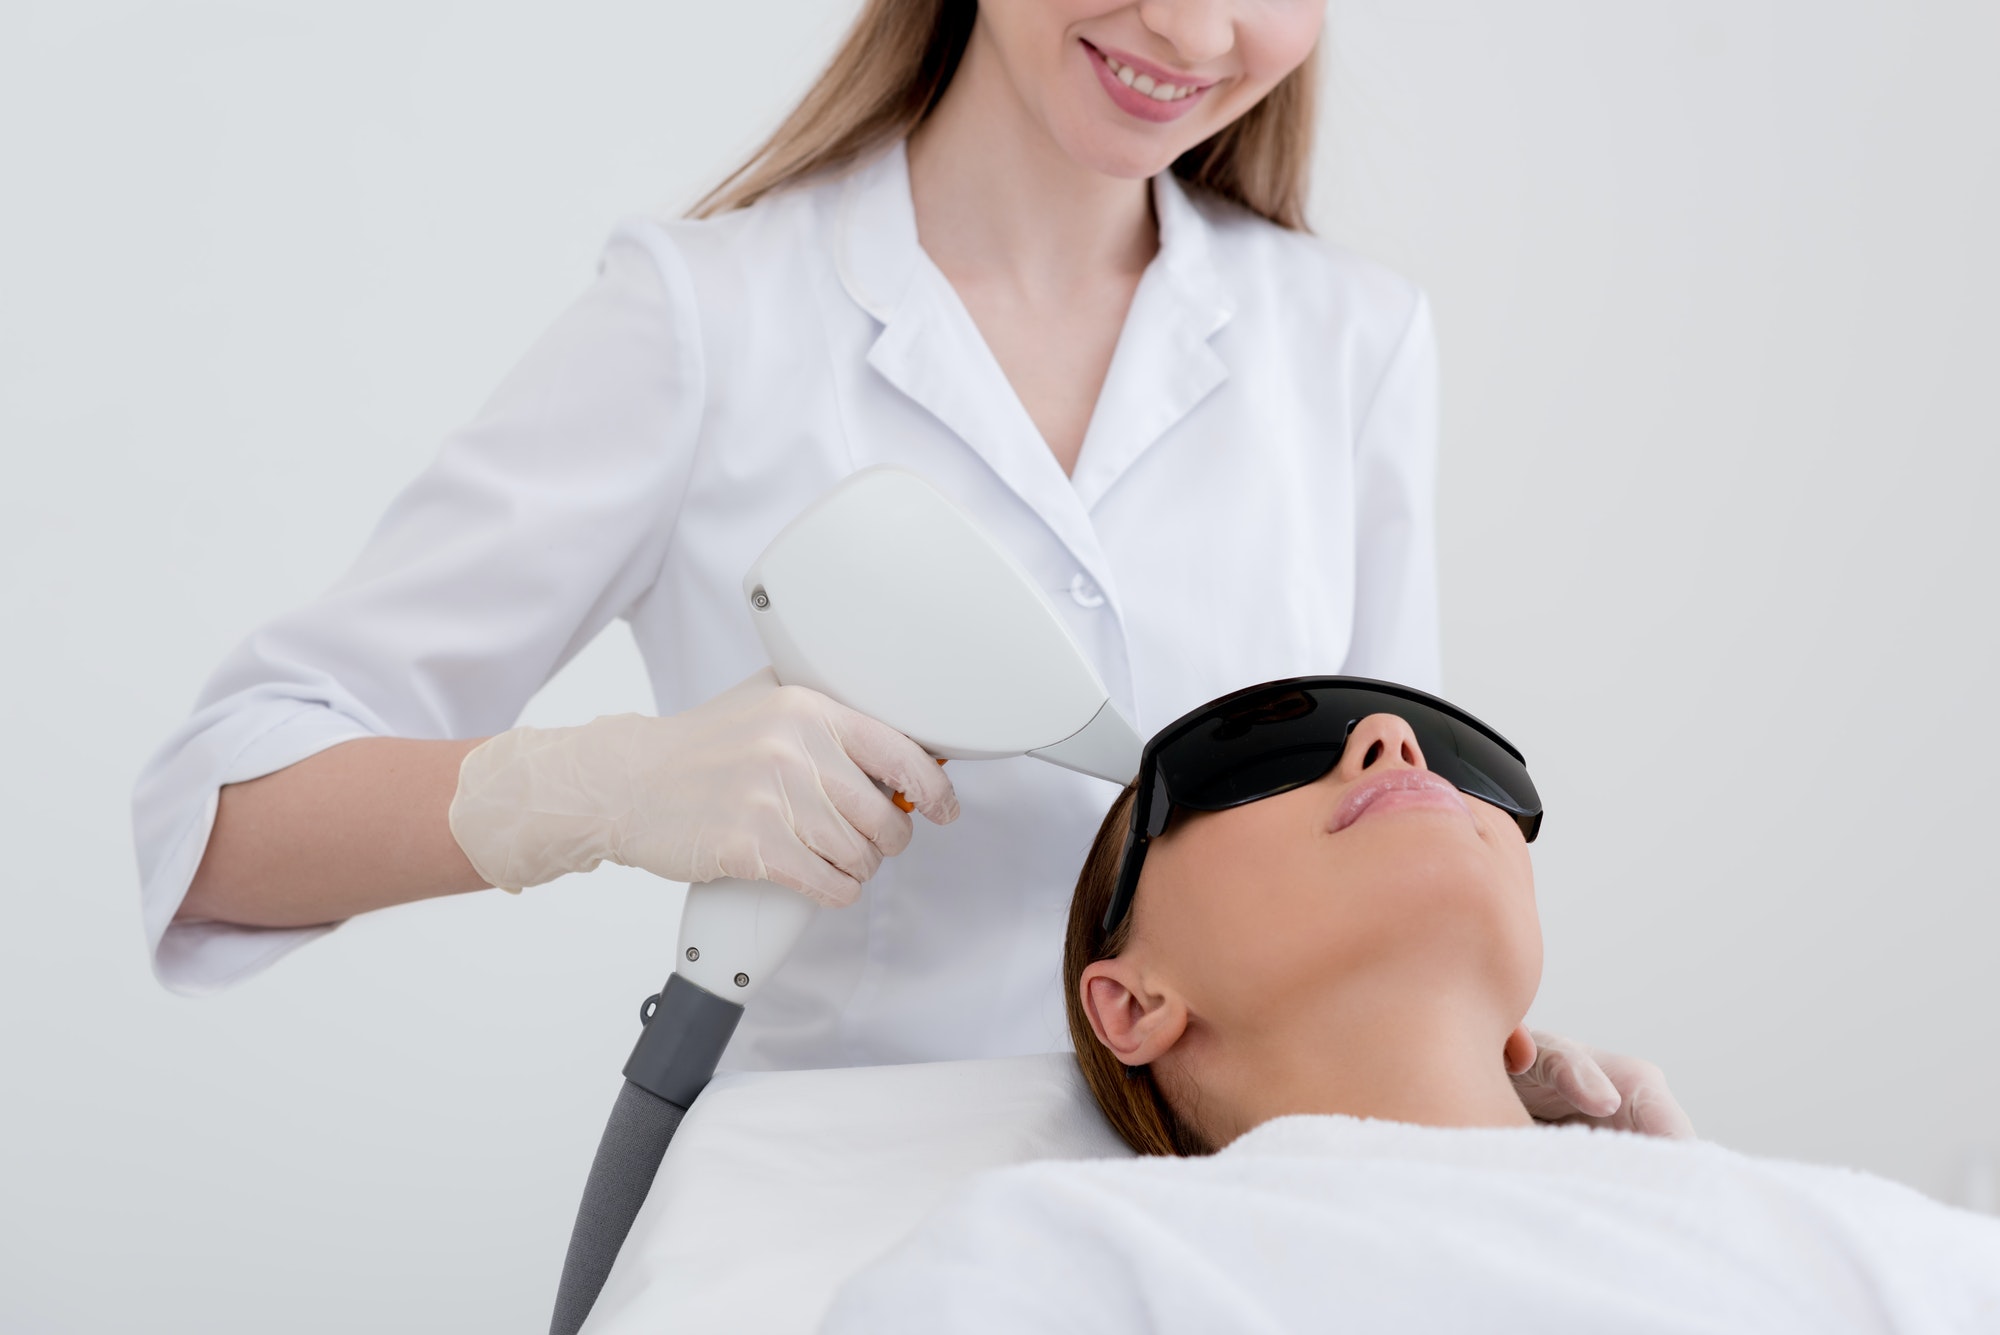 partial view of young woman receiving laser hair removal epilation on face in salon